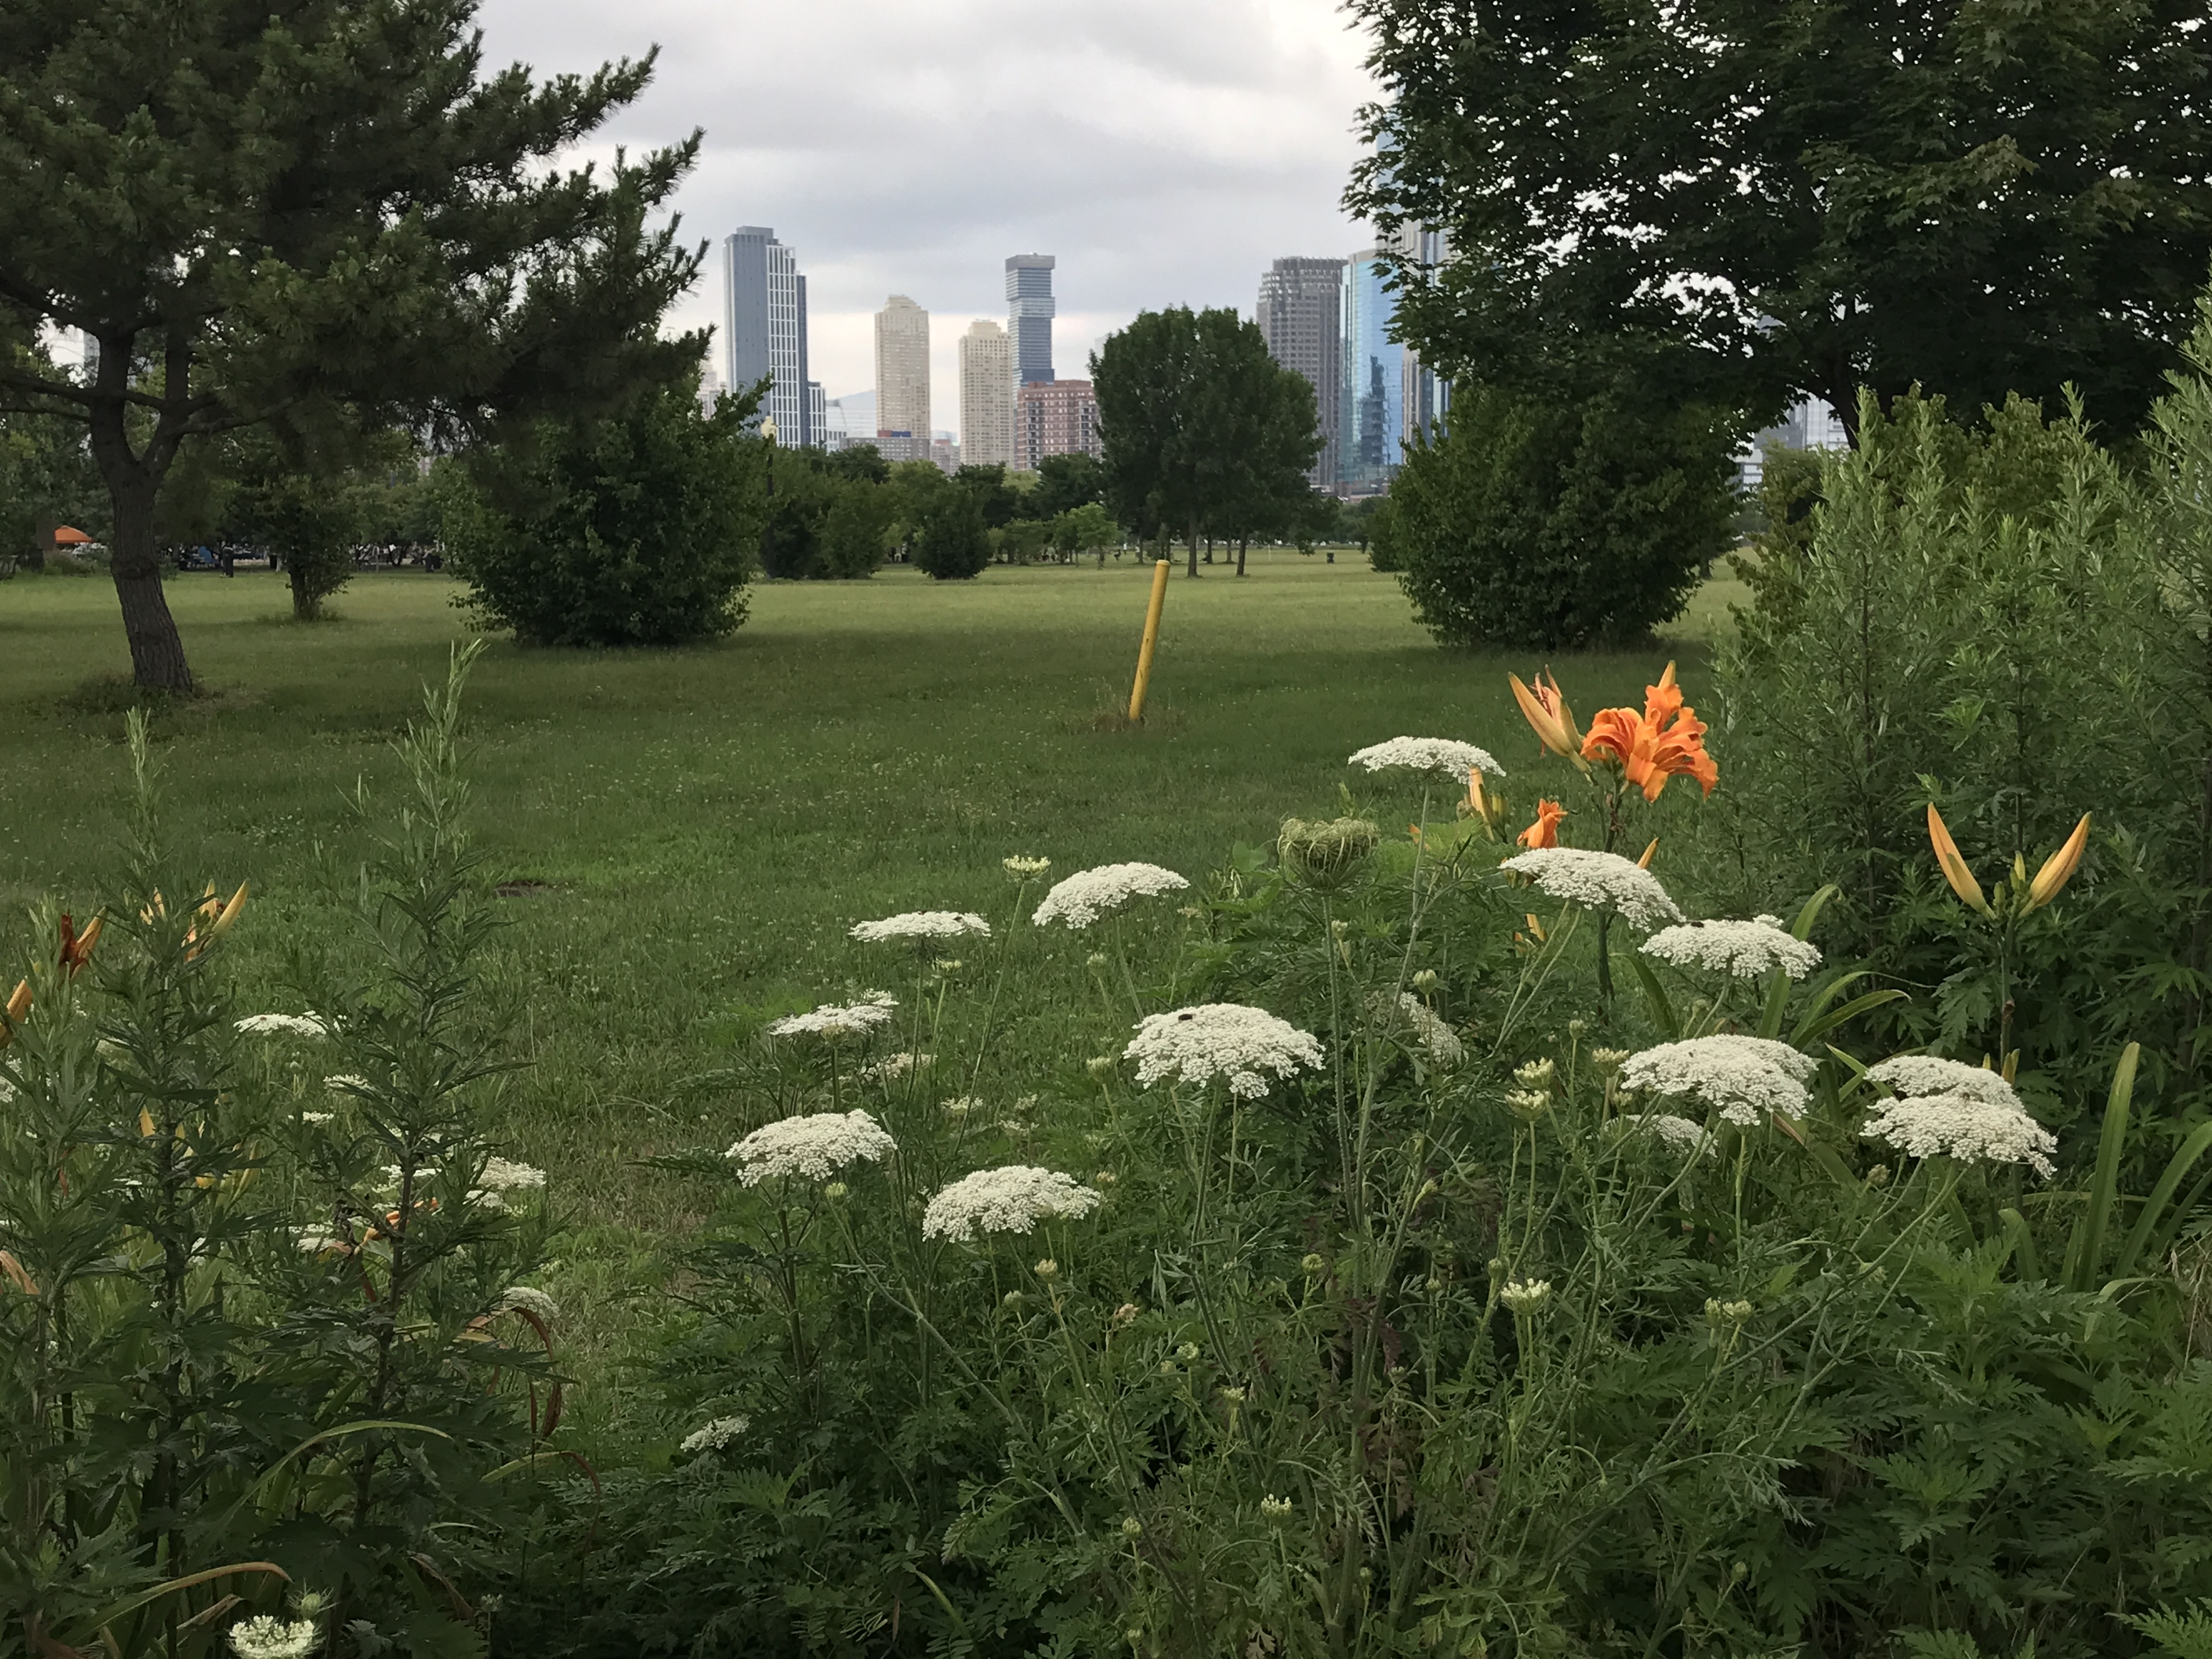 A field of flowers and green grass of Liberty State Park, Jersey City, New Jersey, United States. New York City skyscraper cityscape in the background. Cloudy sky